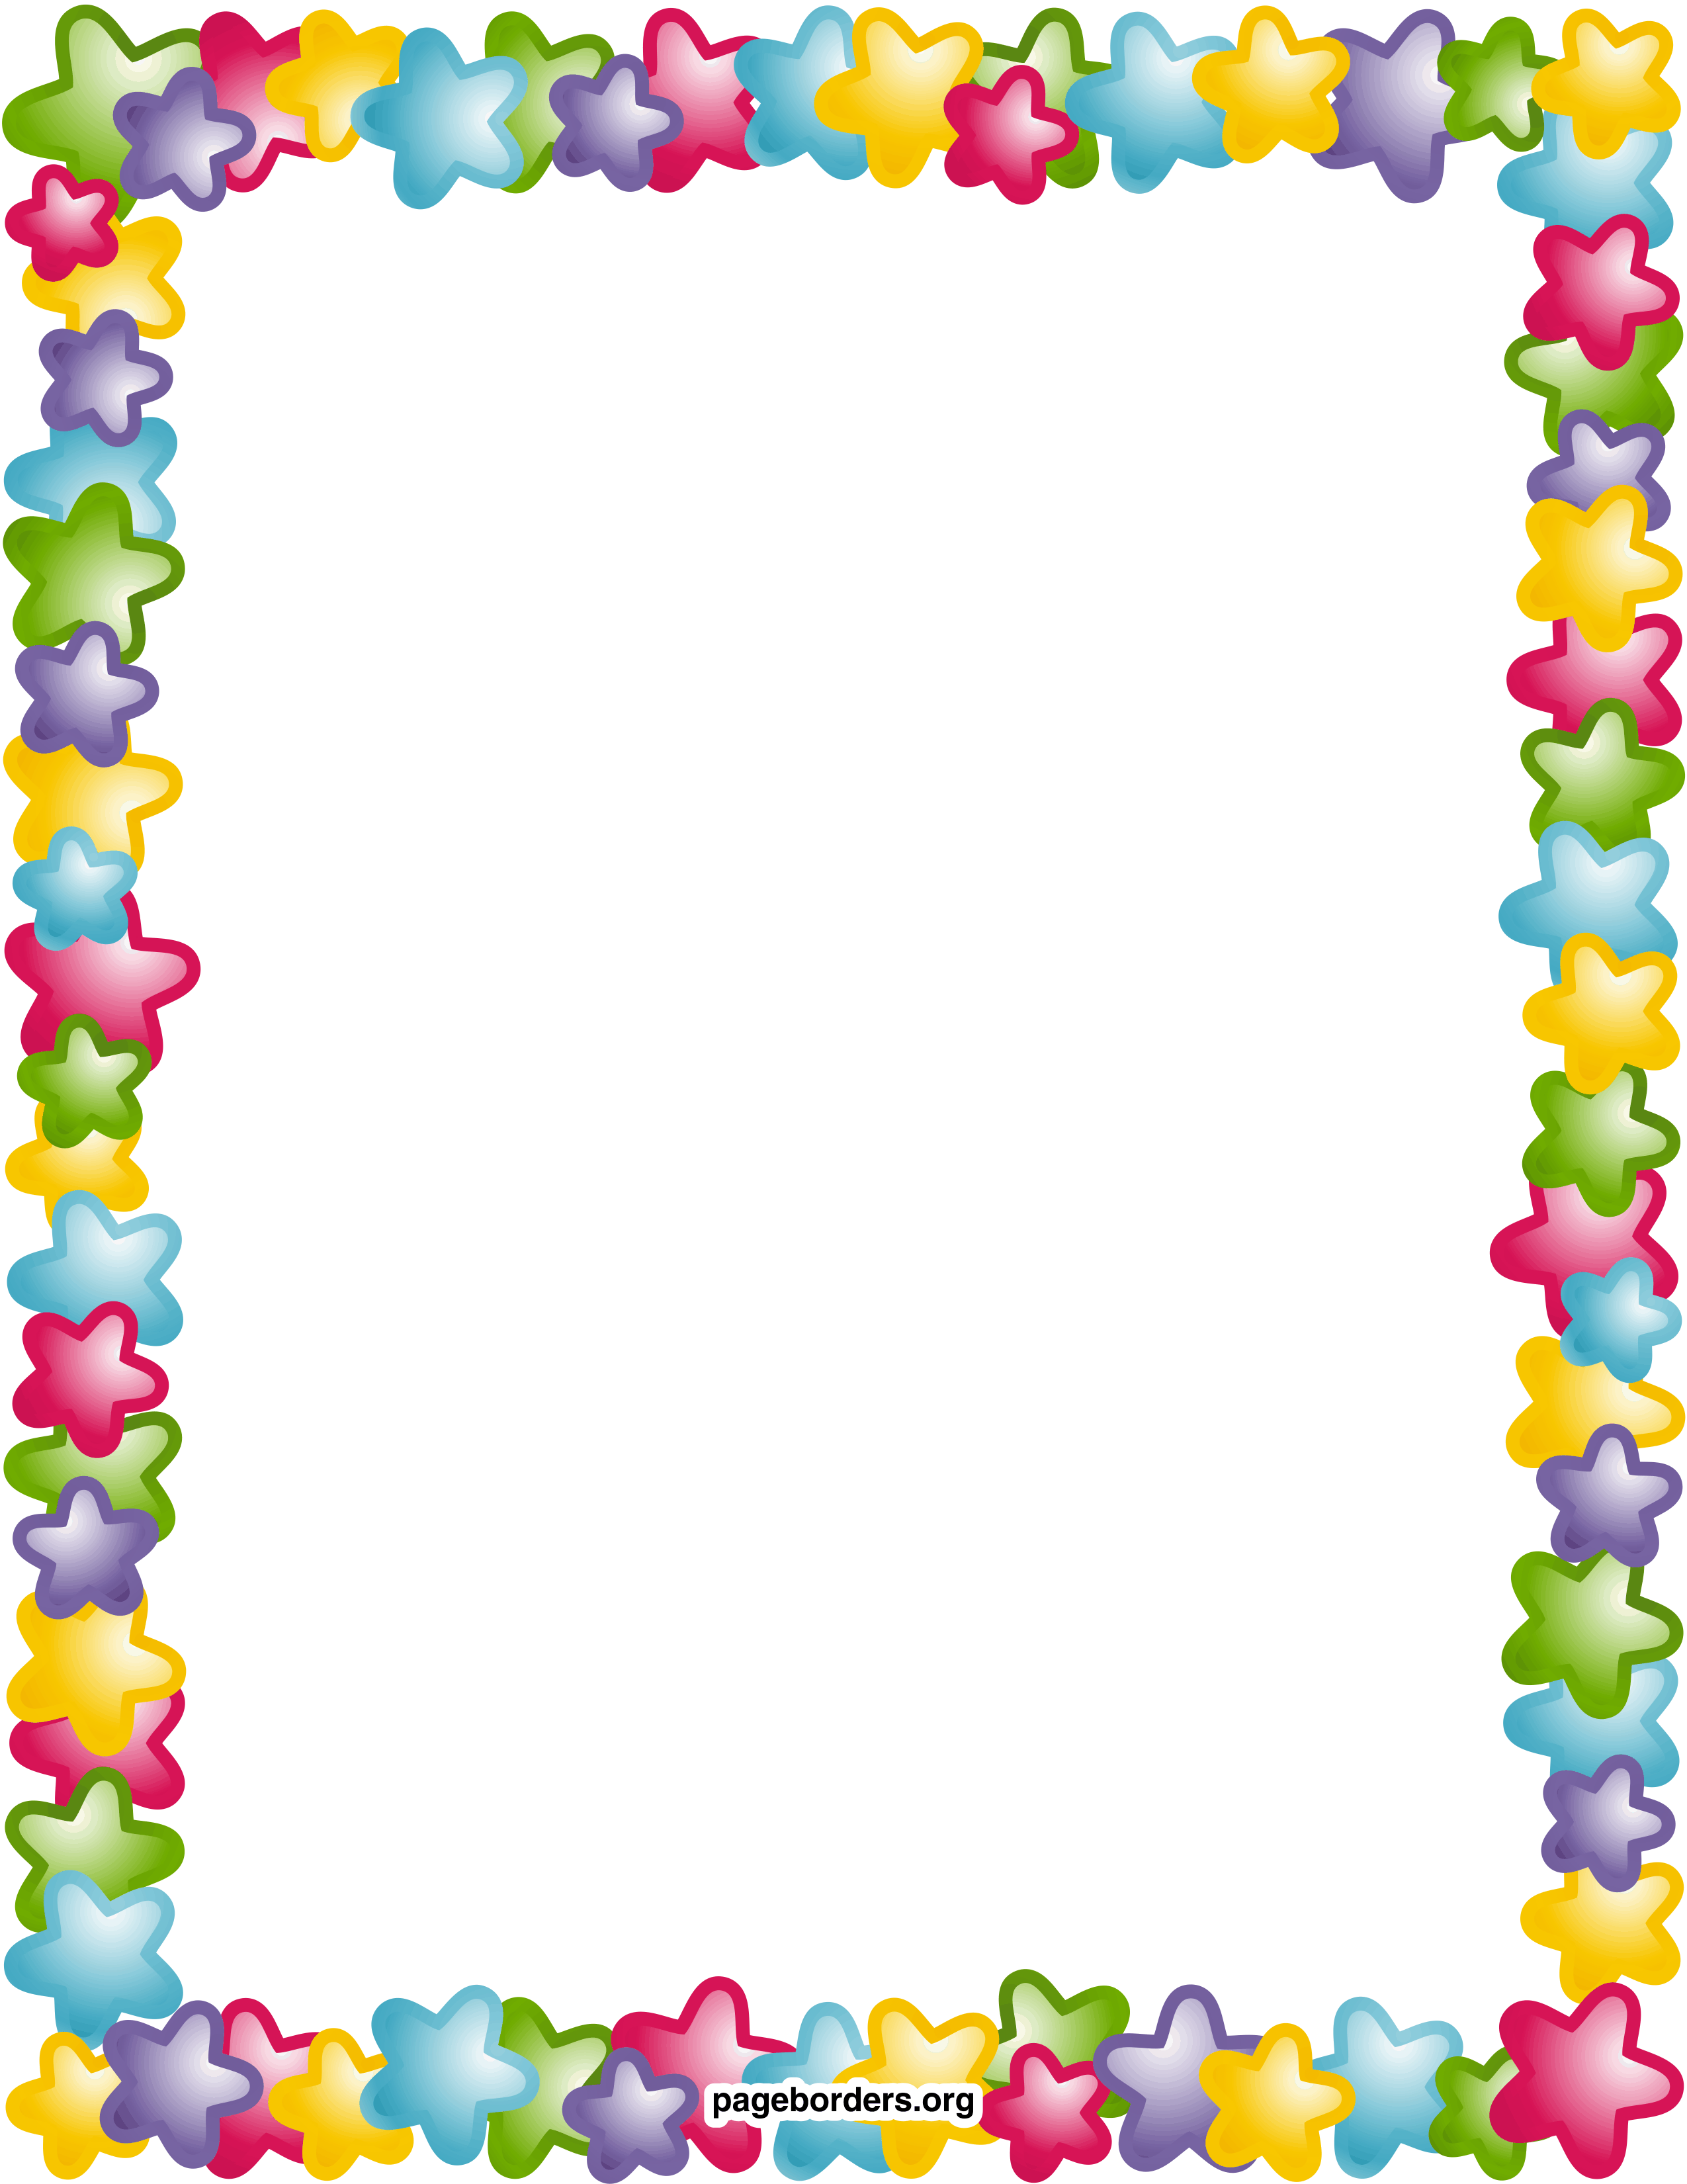 Star Page Borders - Cliparts.co